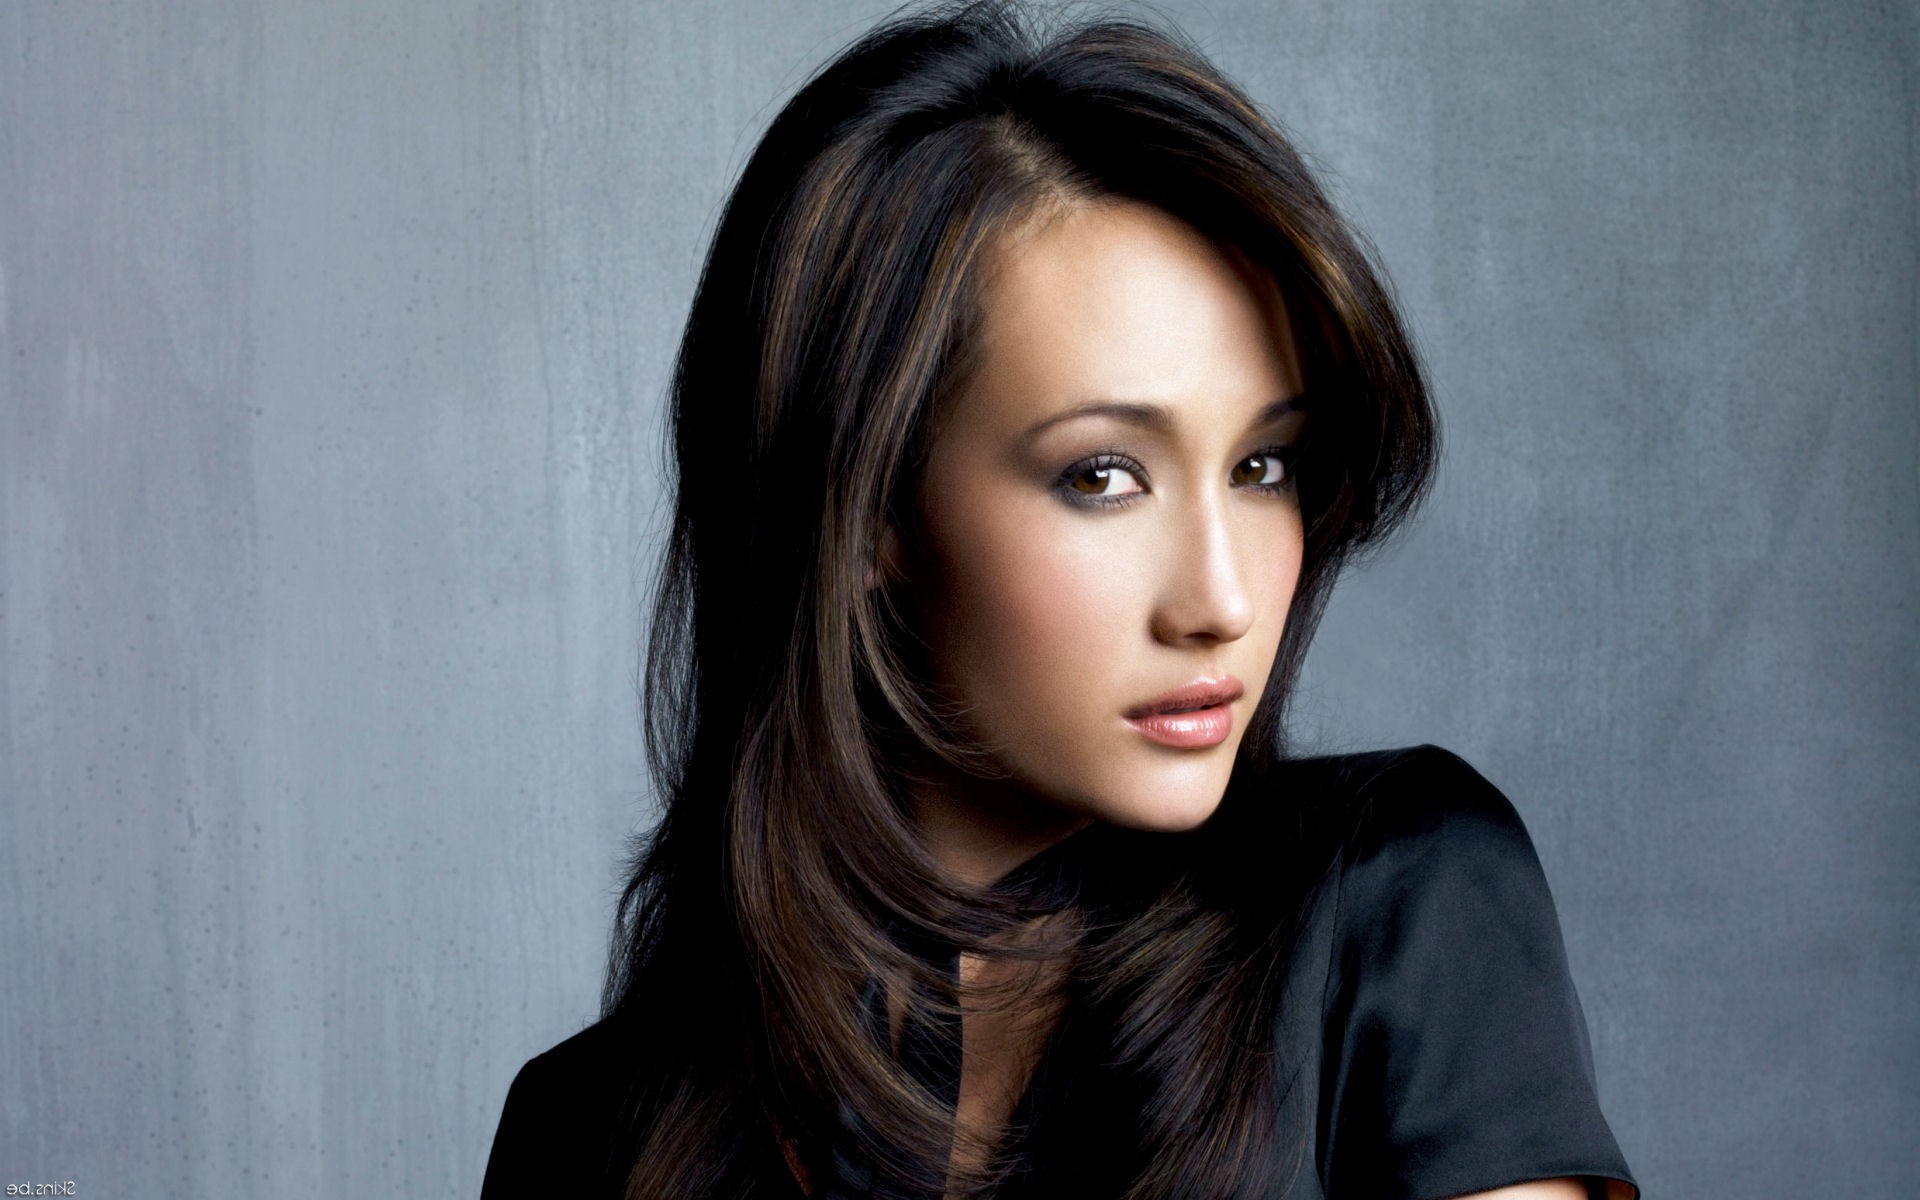 Maggie Q Sexy And Hot Wallpapers  Hot PHOTOSHOOT Bollywood Hollywood  Indian Actress HQ Bikini Swimsuit photo Gallery